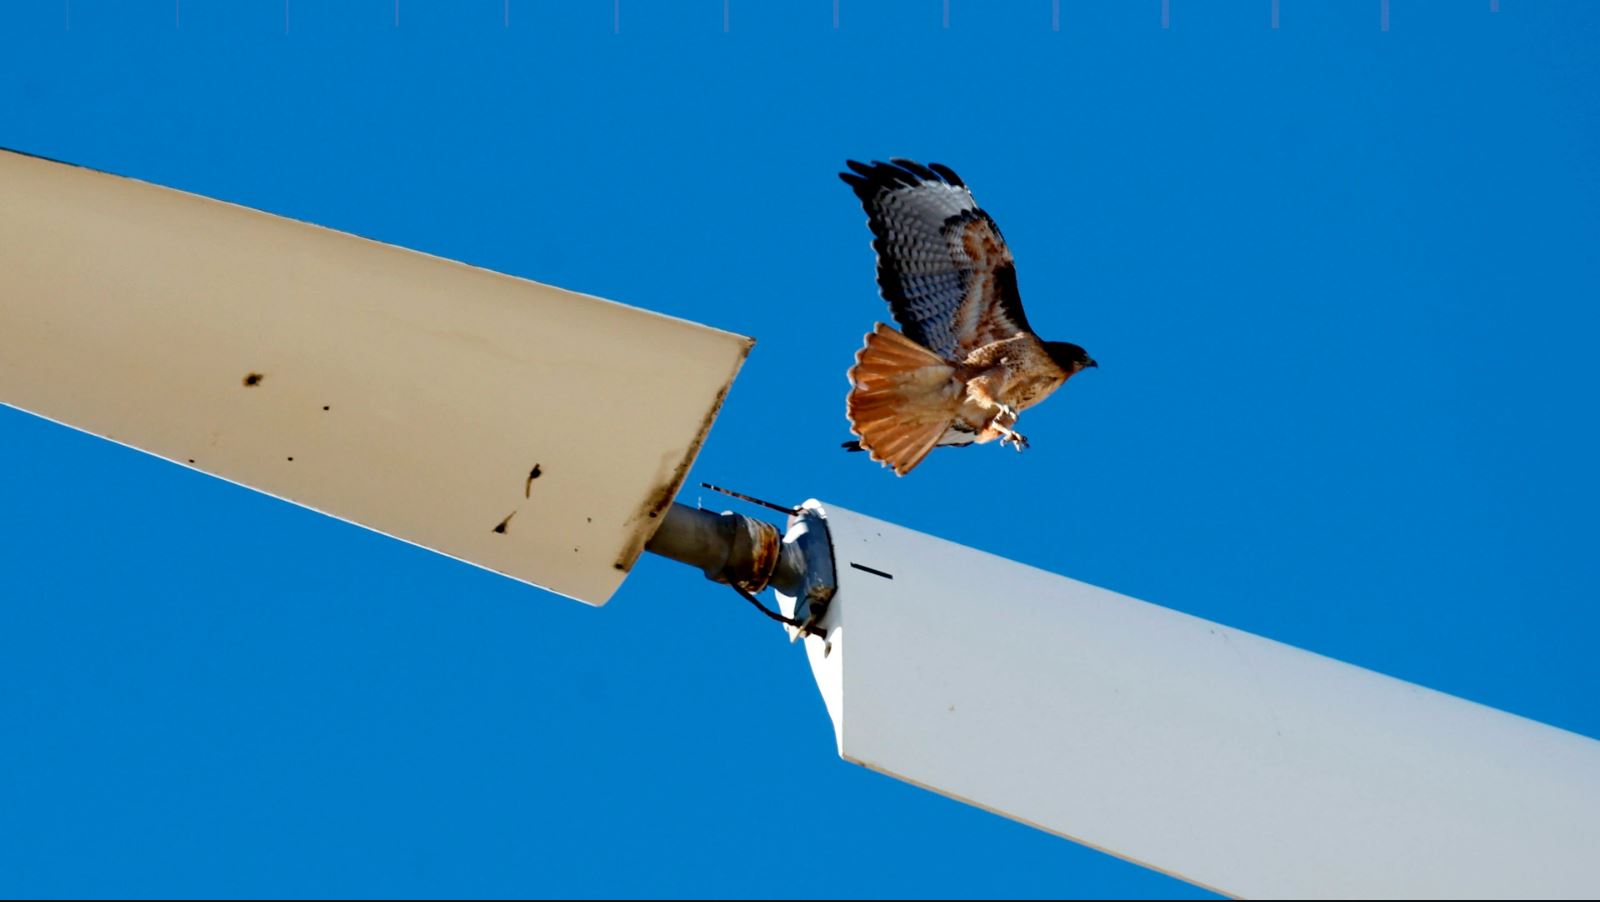 hawk flies above the blades of a wind turbine. Photo from GETTY images